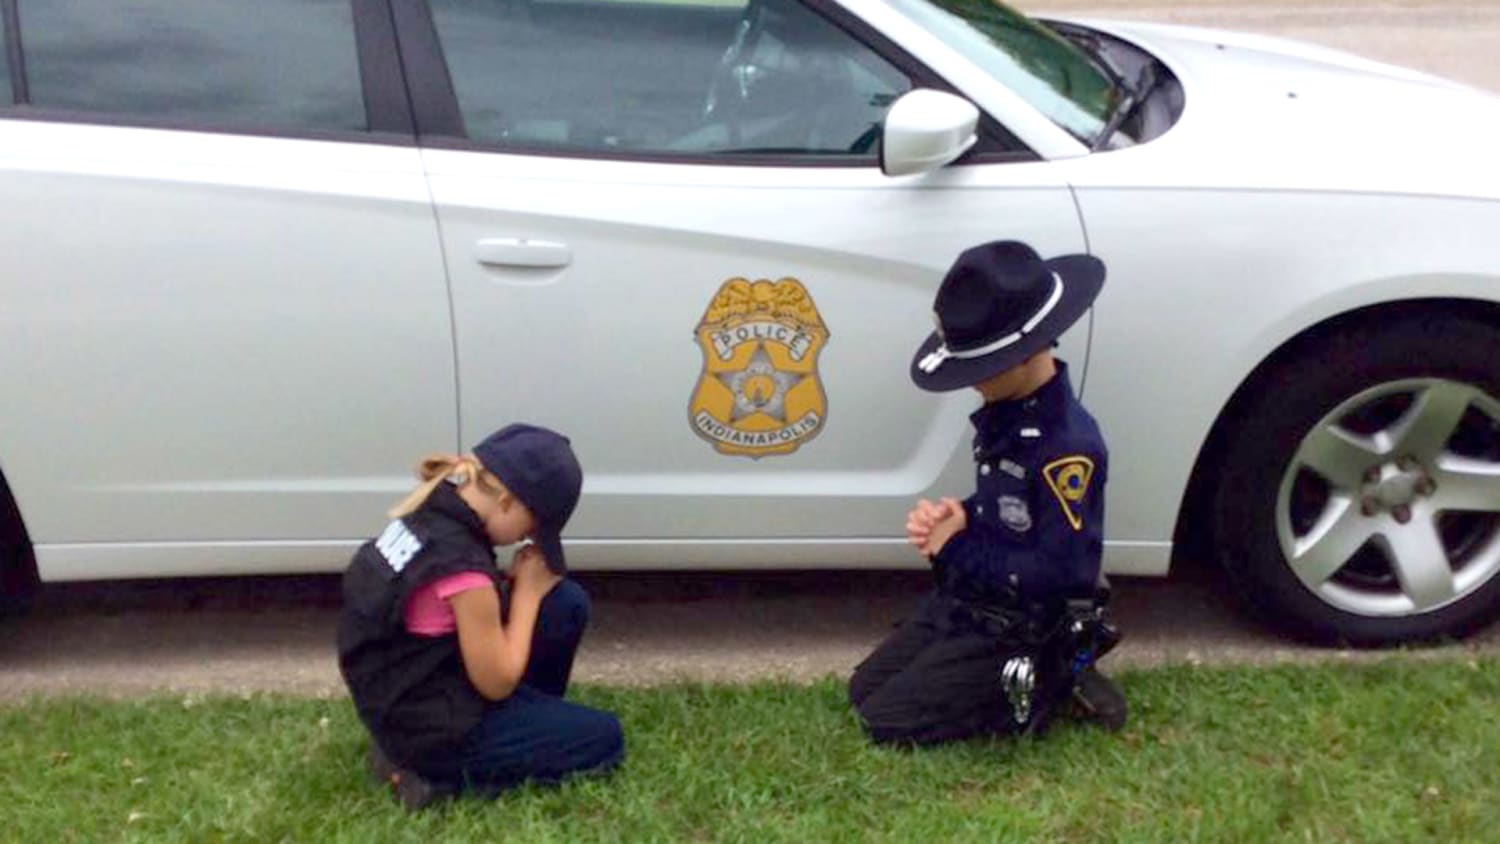 Powerful photo shows children of police officer praying he comes home safely - TODAY.com